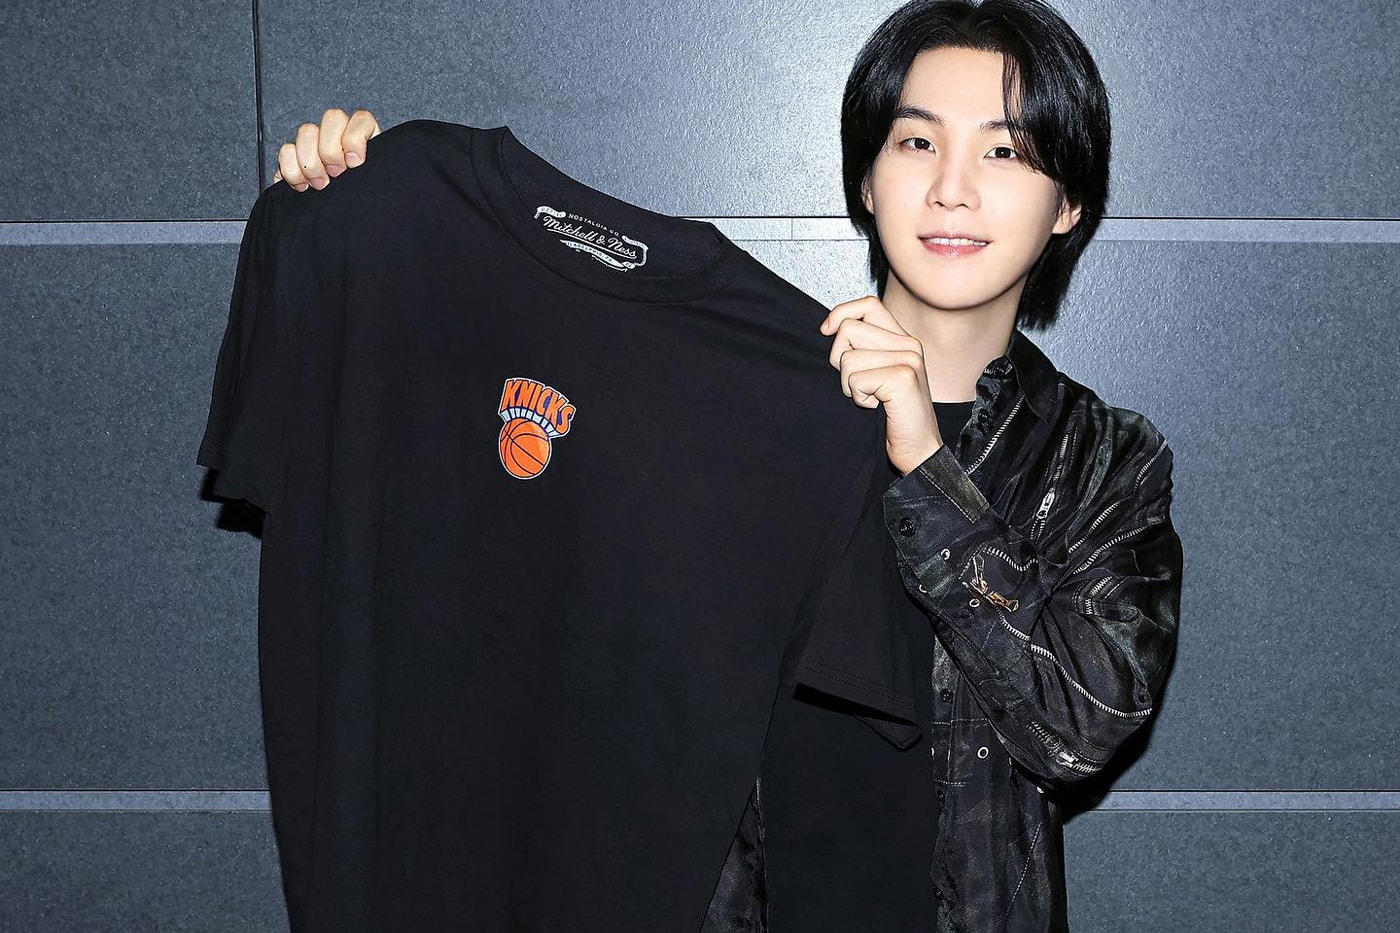 NBA のアンバサダーを務める BTS SUGA がミッチェル & ネスとのコラボレーションを発表 BTS' Suga Unveils NBA Collaboration with Mitchell & Ness new york knics k-pop star t shirts hoodies jackets shorts Chicago Bulls, the Golden State Warriors, the Los Angeles Clippers, the Los Angeles Lakers brooklyn nets